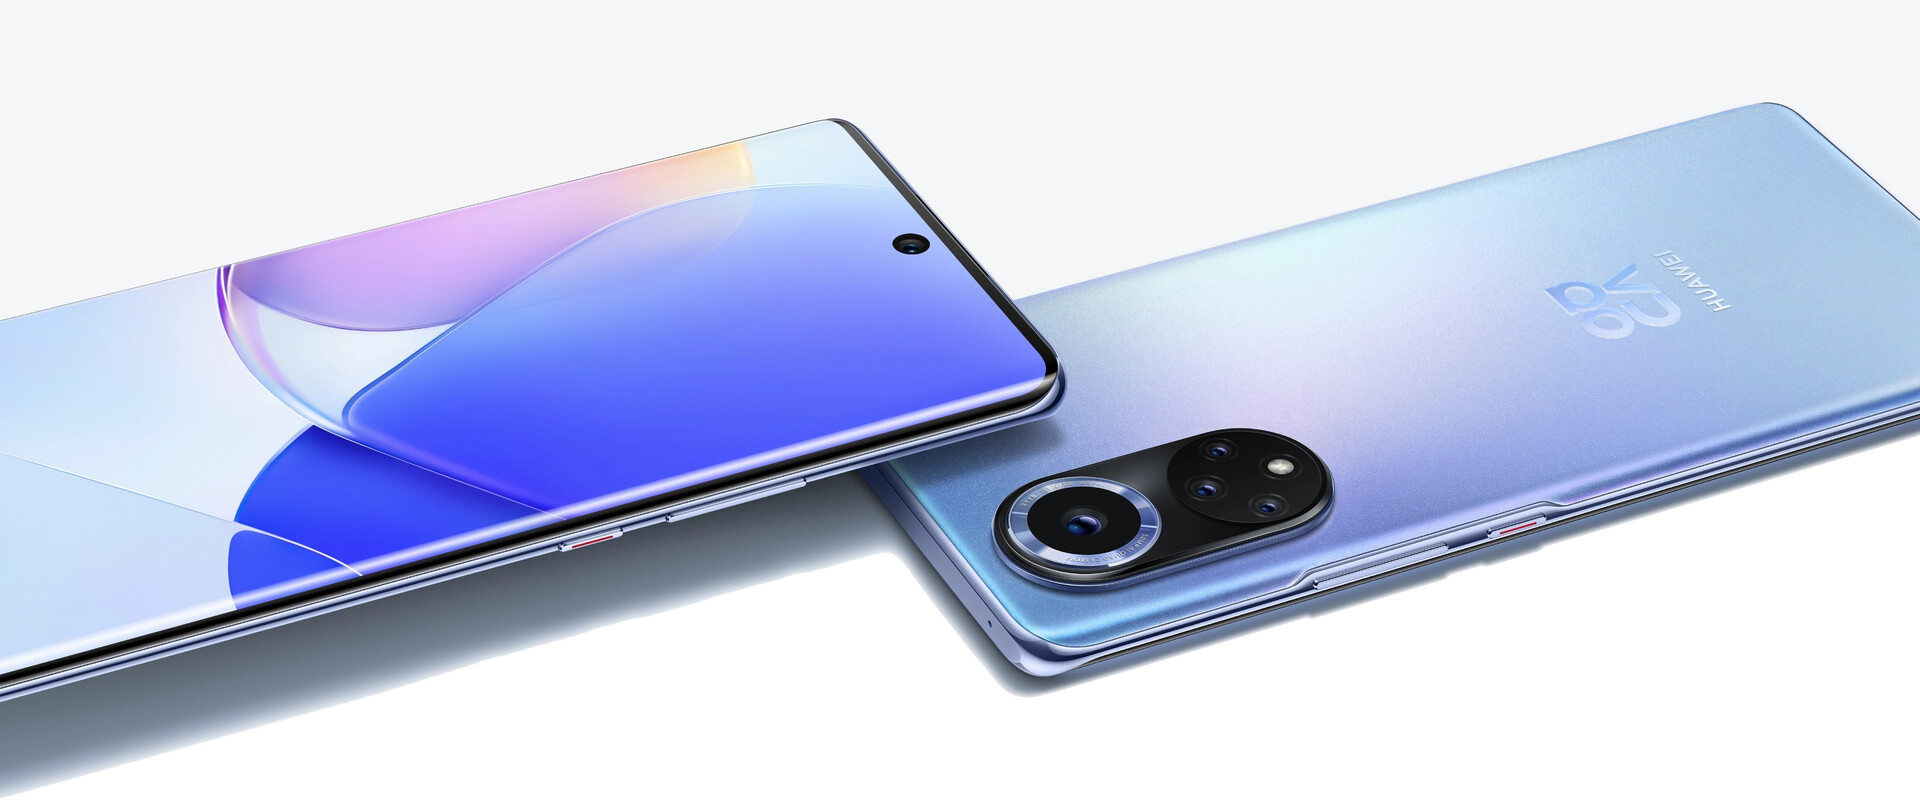 Huawei nova 9 smartphone review: Without 5G but with some special camera features - NotebookCheck.net